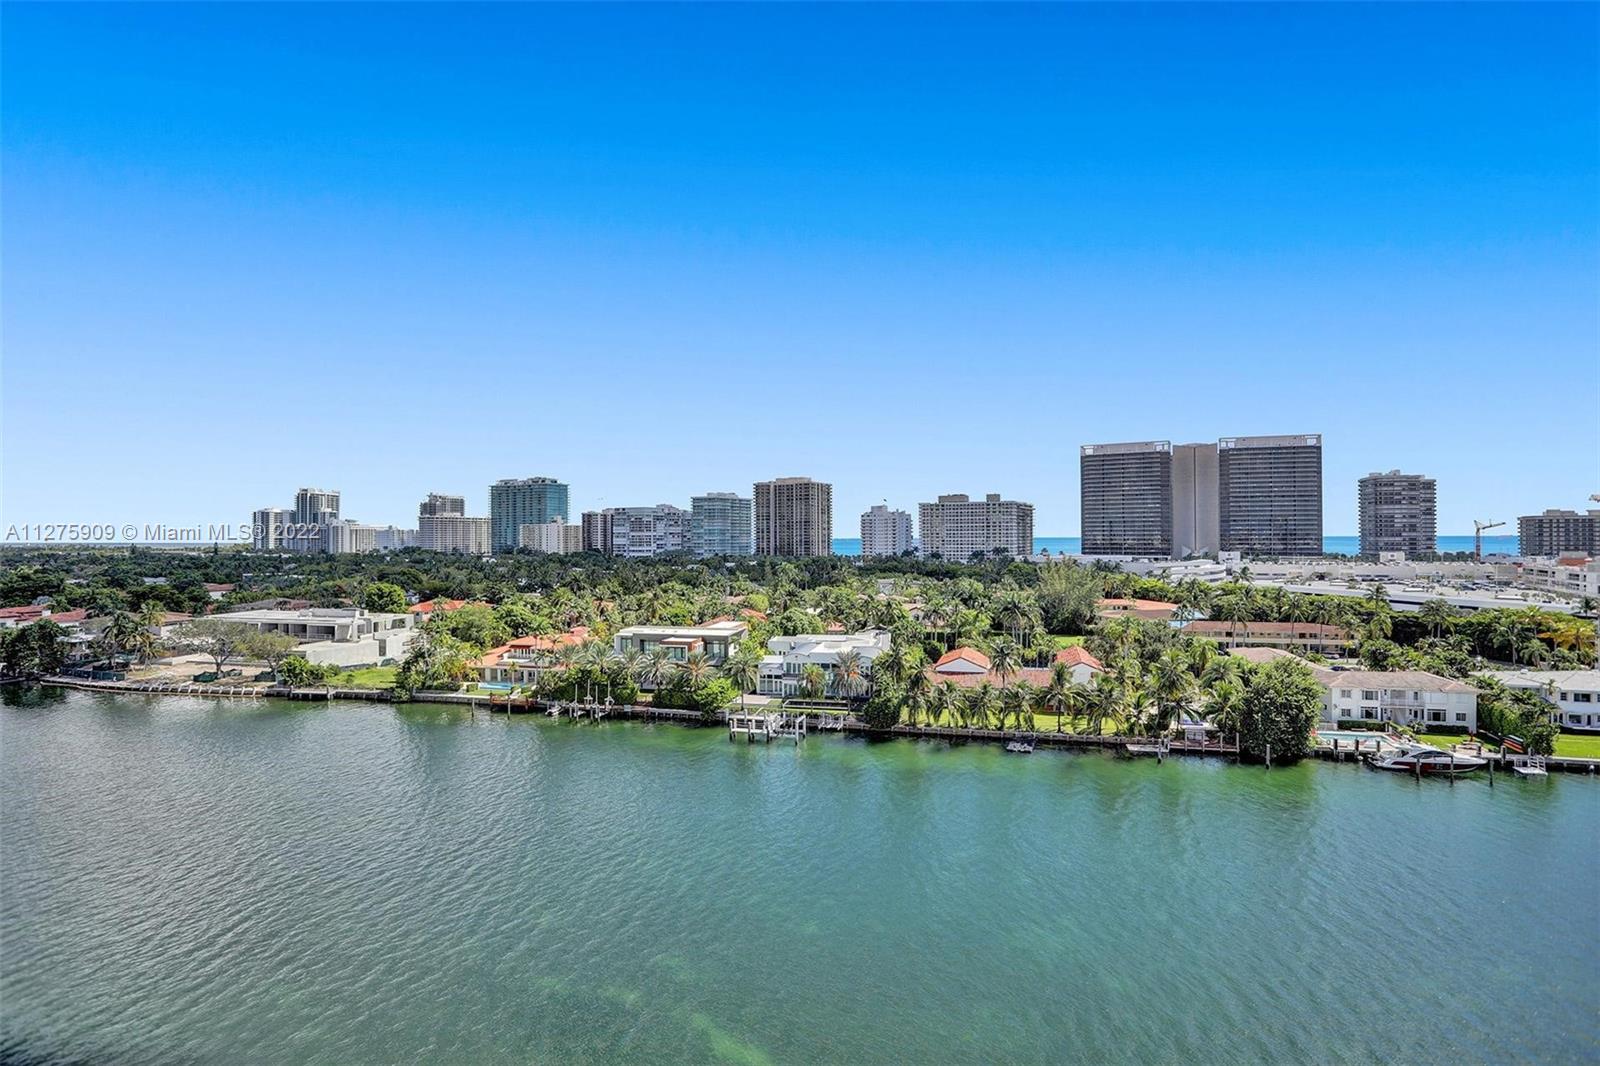 Incredible opportunity in Bay Harbor Islands to own a 3 bd 2 1/2 bath condo with views of the ocean and Bal Harbour. 2 separate
balconies, main balcony off of living room faces Bal Harbour and the ocean, wonderful views from high floor. Other balcony faces
the Intracoastal. Location is very close to Ruth K Broad school, beaches, Bal Harbour Shoppes, across the street from the Palm.
Carroll Walk has recently been upgraded including painting of the entire building.